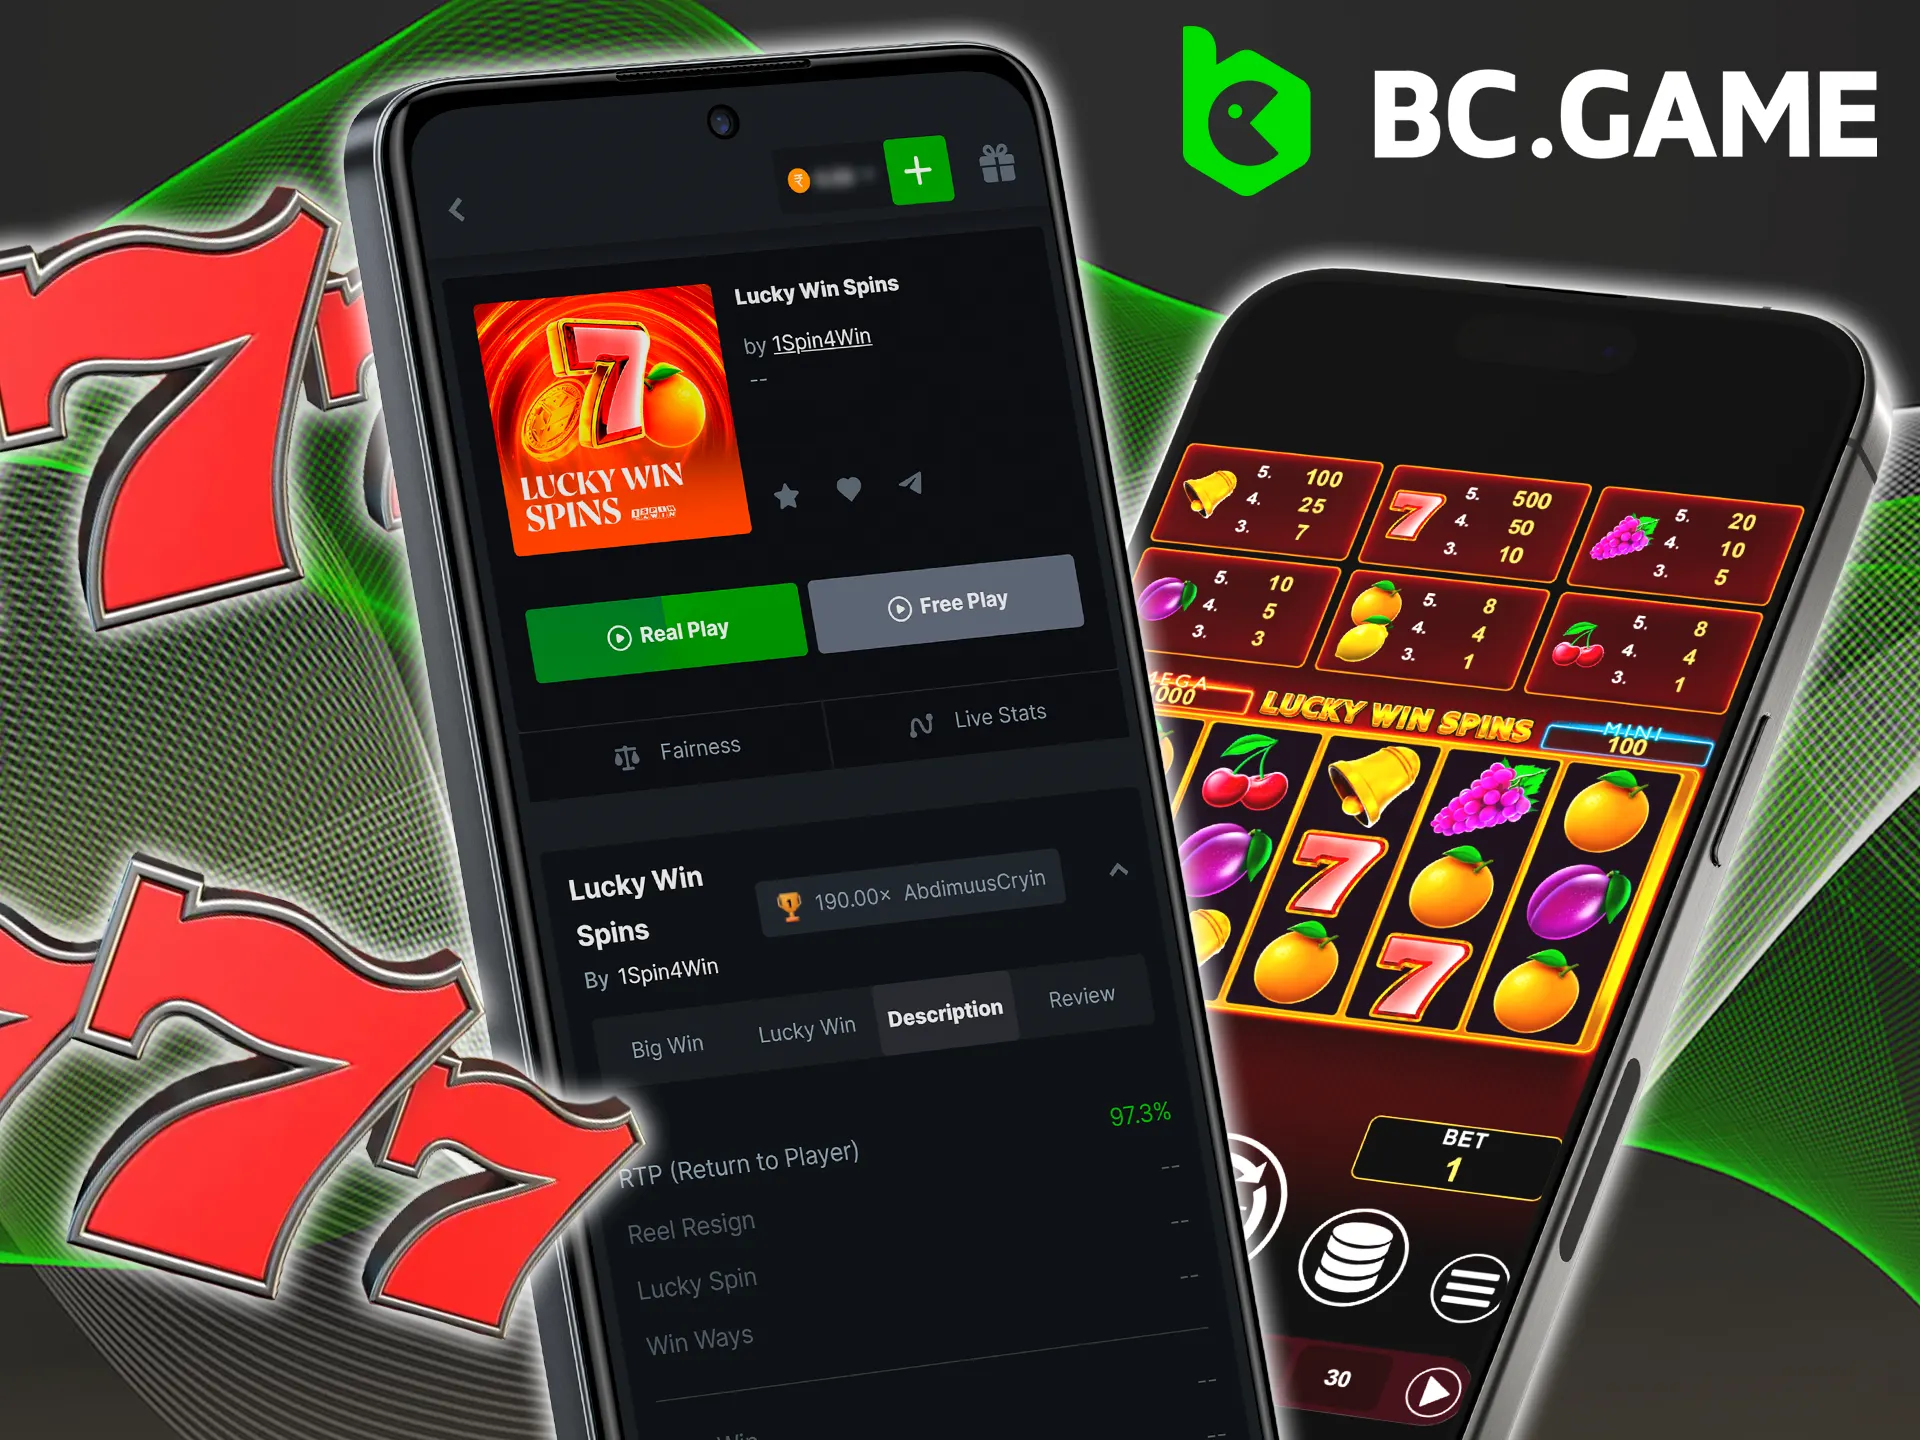 Install the BC Game app and play Lucky Win Spins.